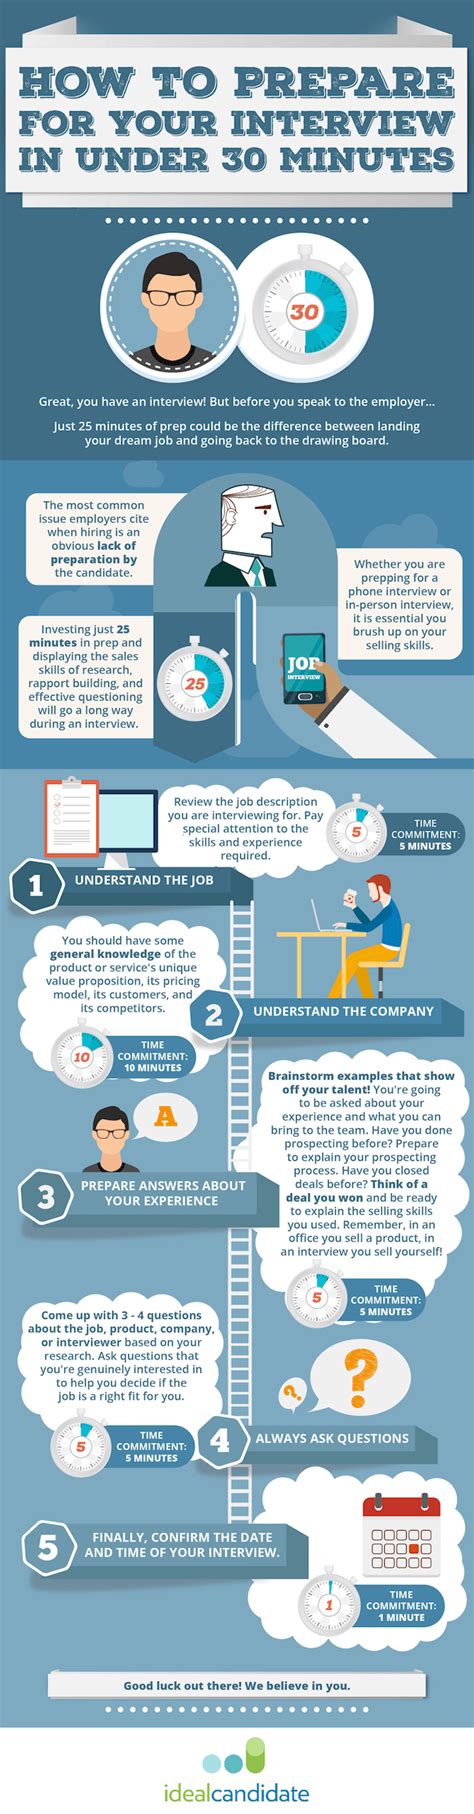 How To Prepare For An Interview In Less Than 30 Minutes Infographic